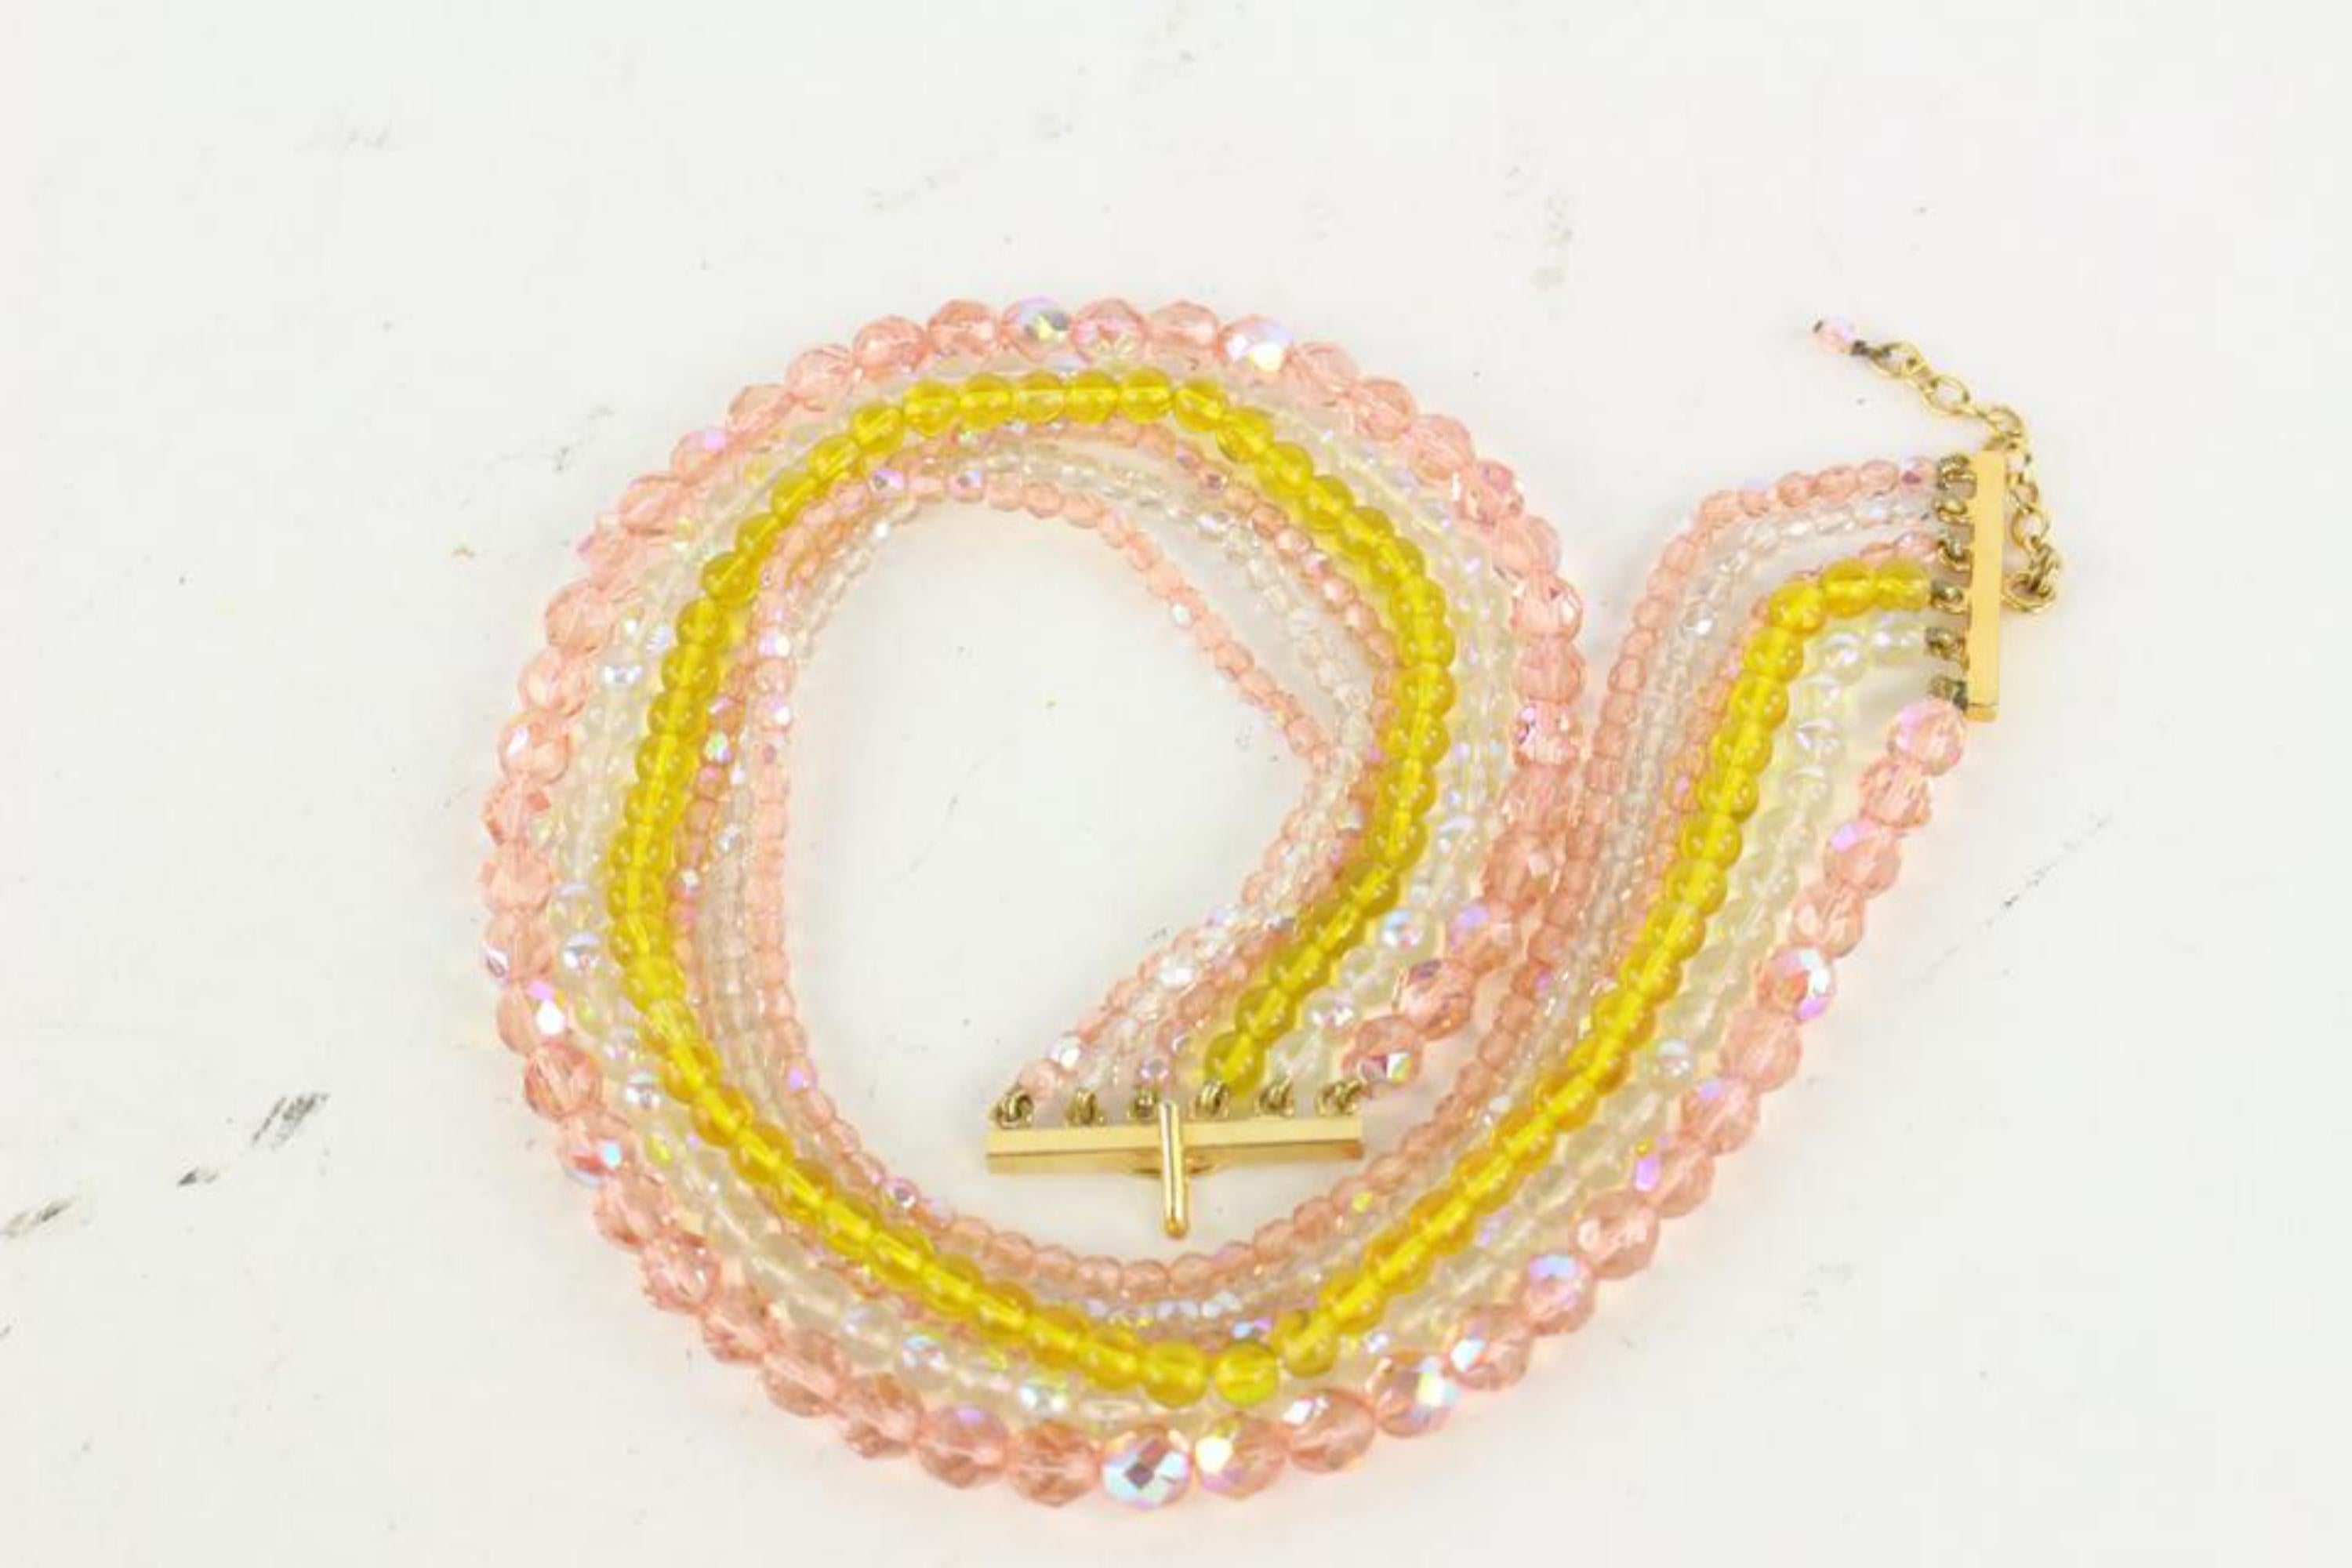 Chanel Rare Pink x Yellow Multi Strand Bead Stone  Choker Necklace 929cas88 For Sale 1